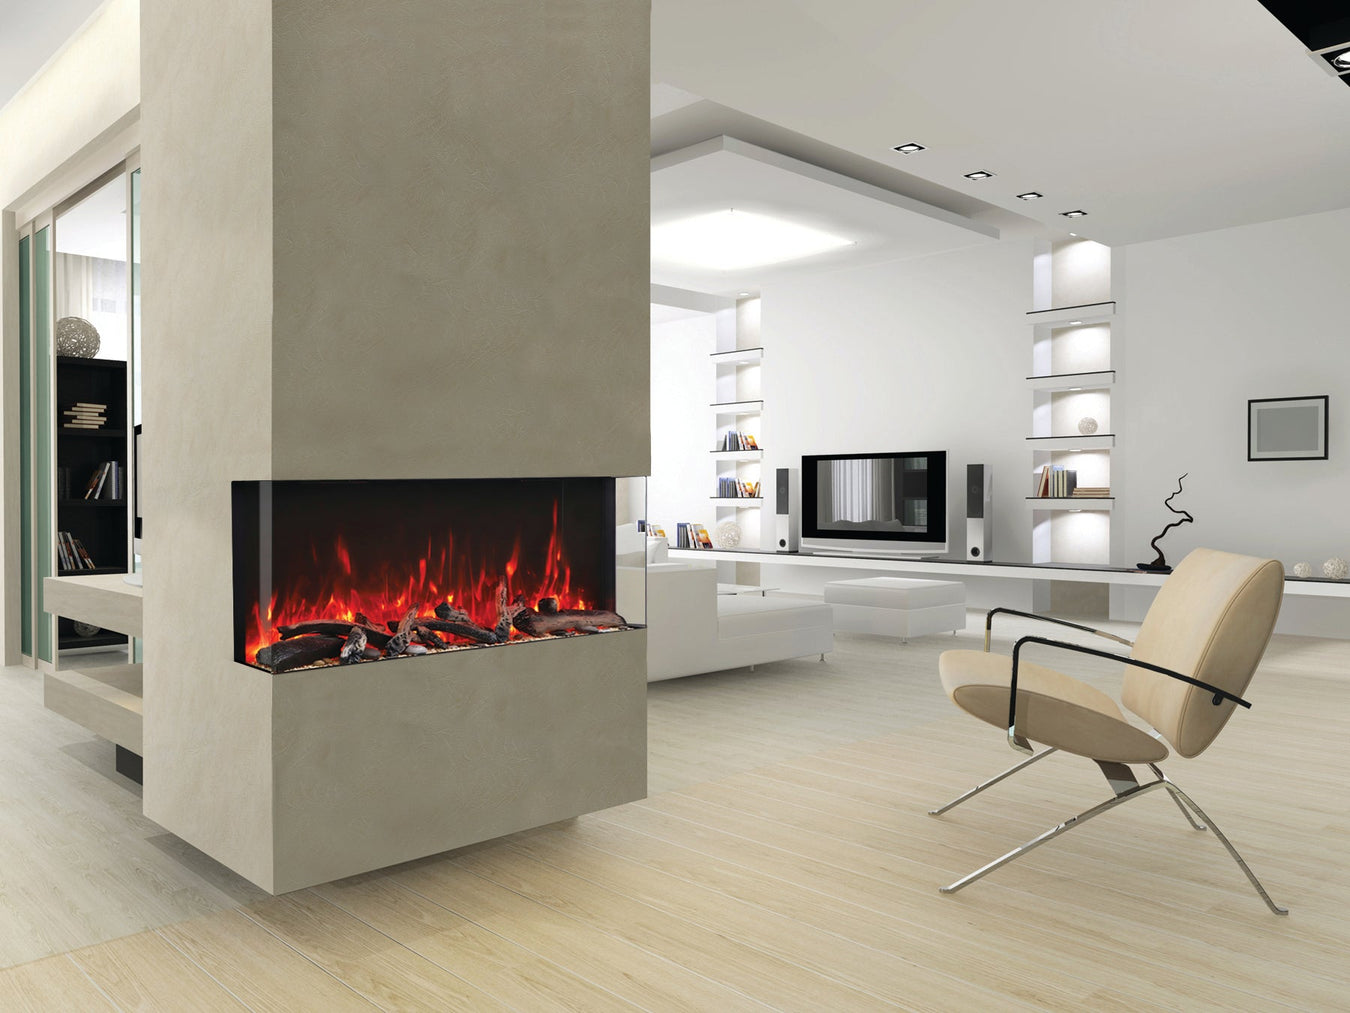 Amantii 40" Tru-View XL XT Three Sided Electric Fireplace -40-TRV-XT-XL- Lifestyle Living Room Fireplace Concrete Division